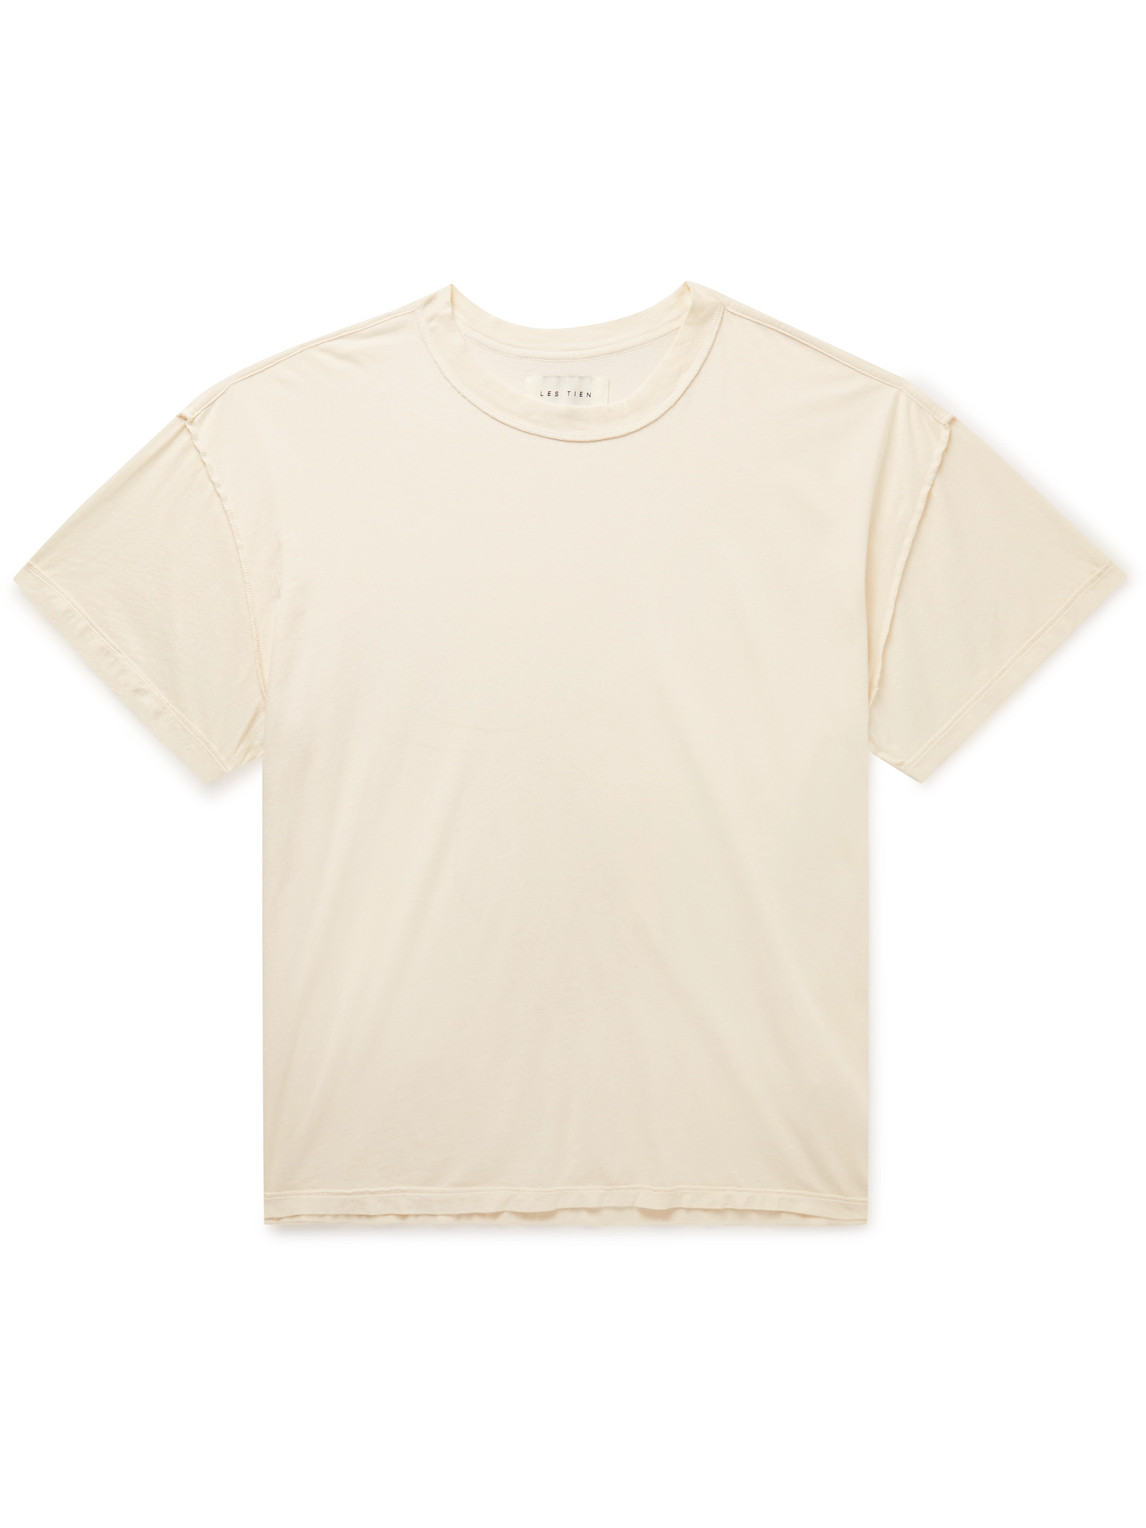 Inside Out Garment-Dyed Combed Cotton-Jersey T-Shirt